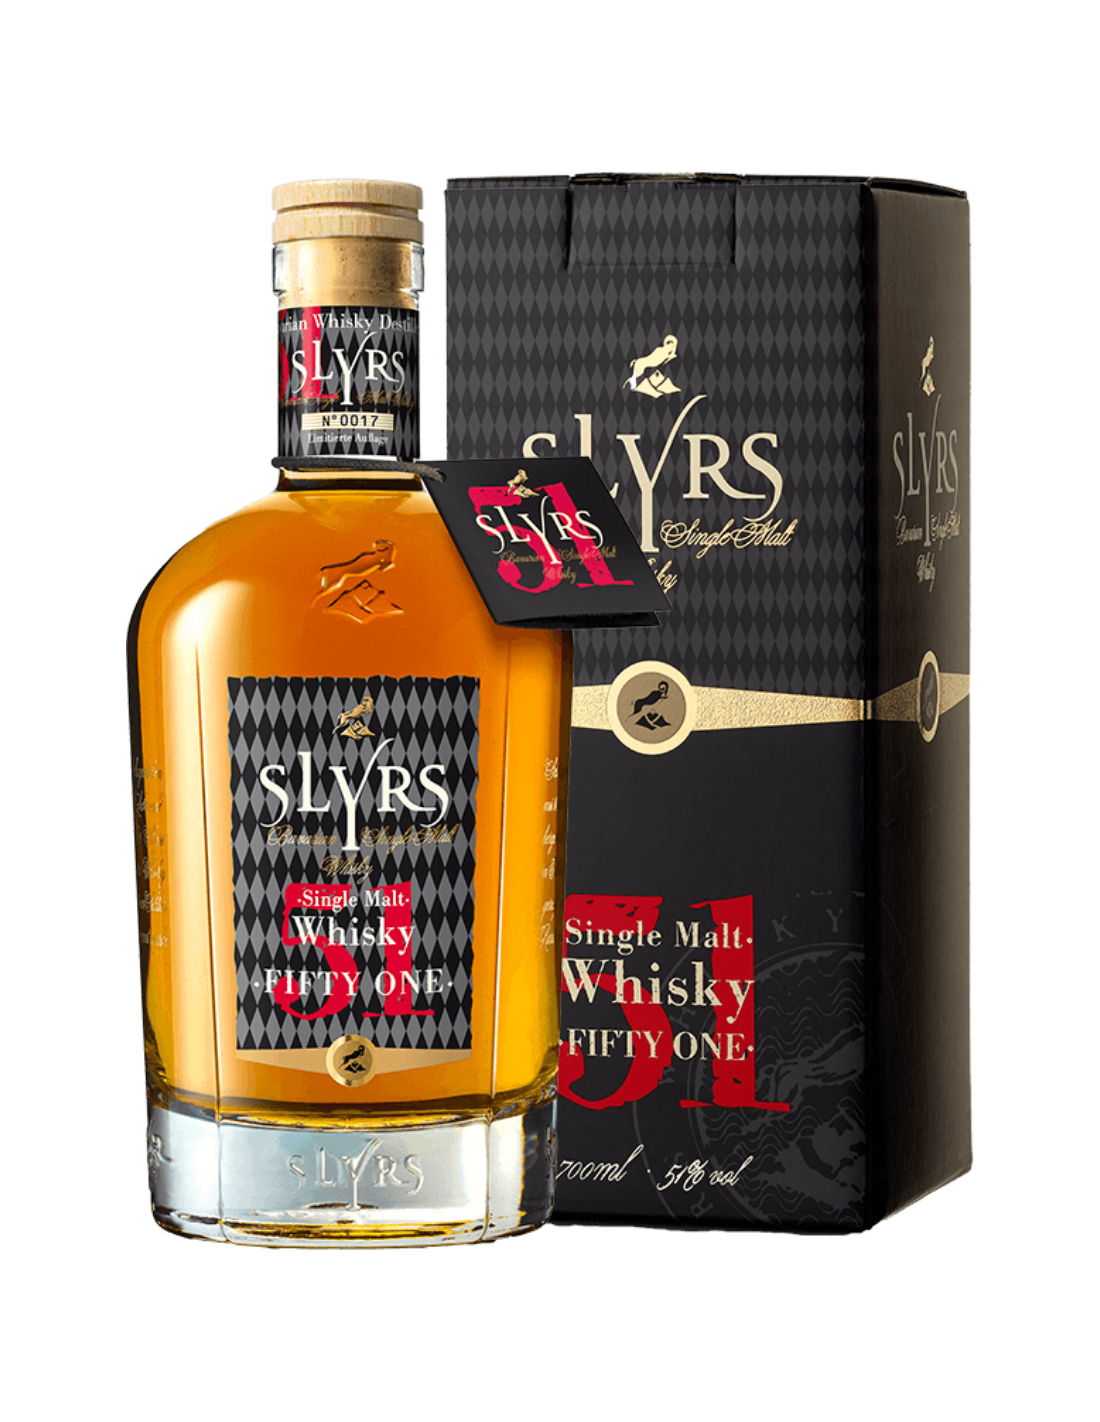 Whisky Slyrs 51, 0.7L, 43% alc., Germania alcooldiscount.ro